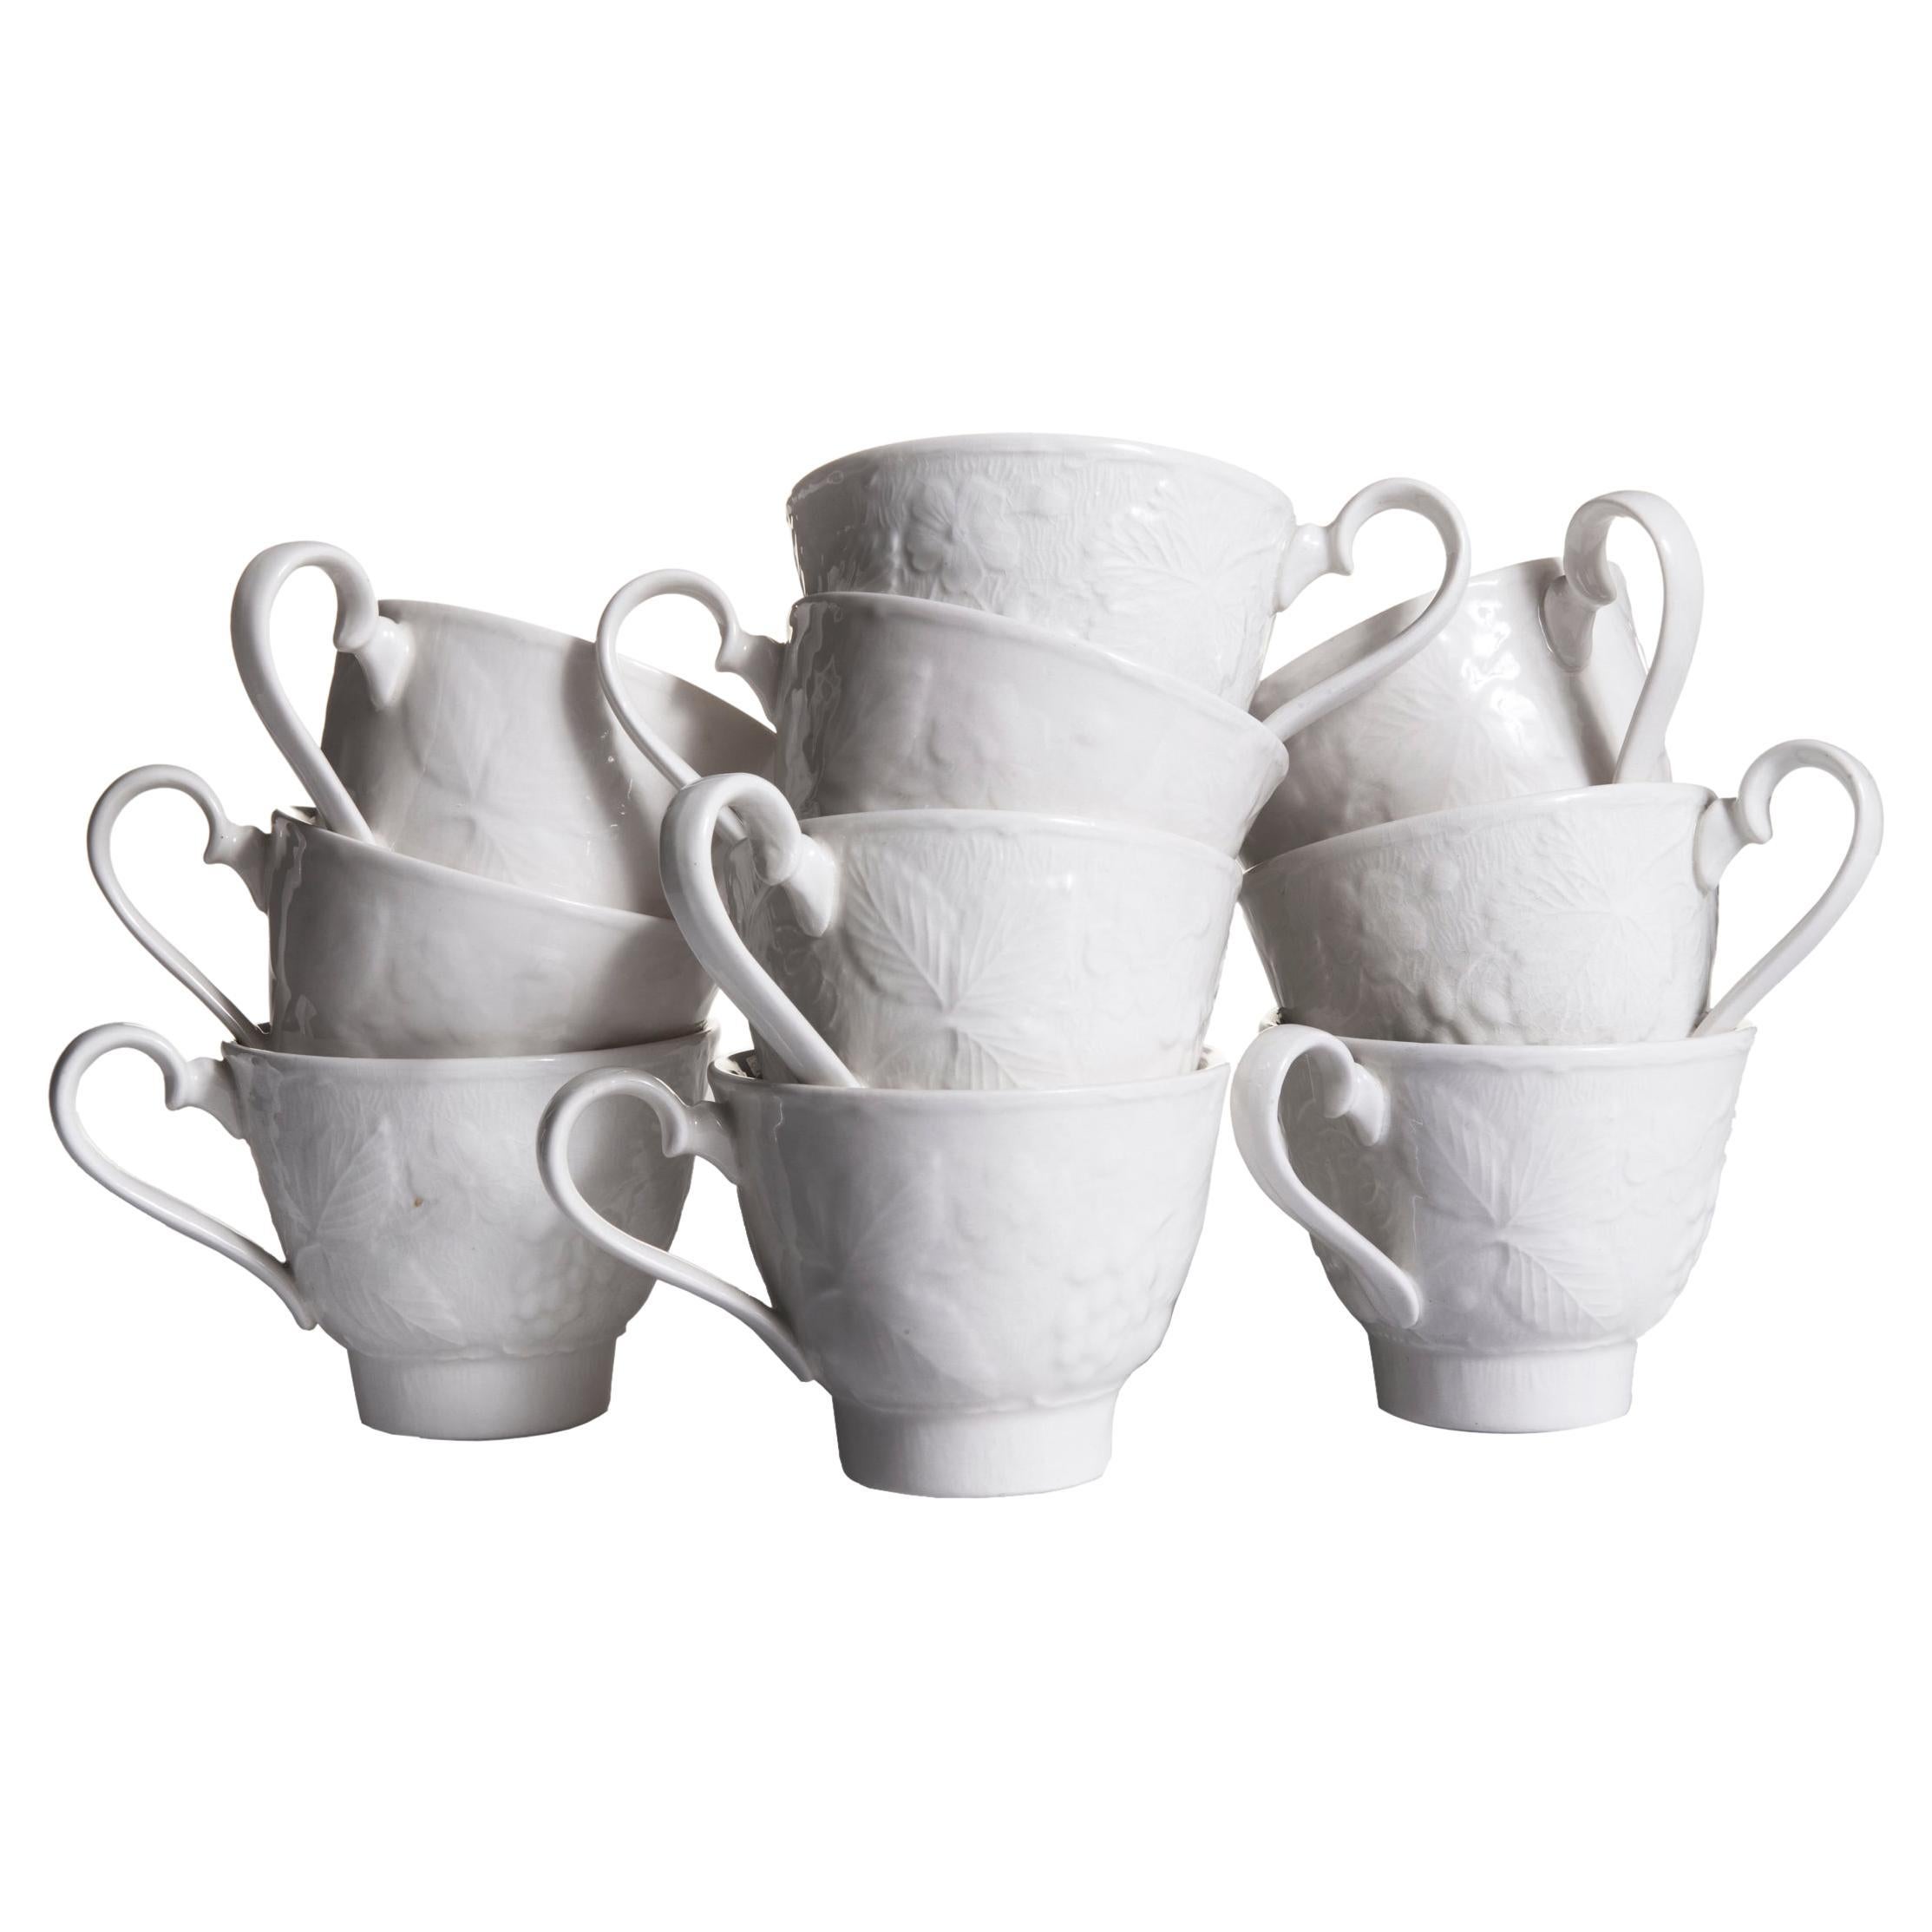 Burgess & Leigh English Ironstone teacups & saucers in the Davenport pattern with embossed strawberry and grape leaf design.
Set of 10.
Cups; 3.5